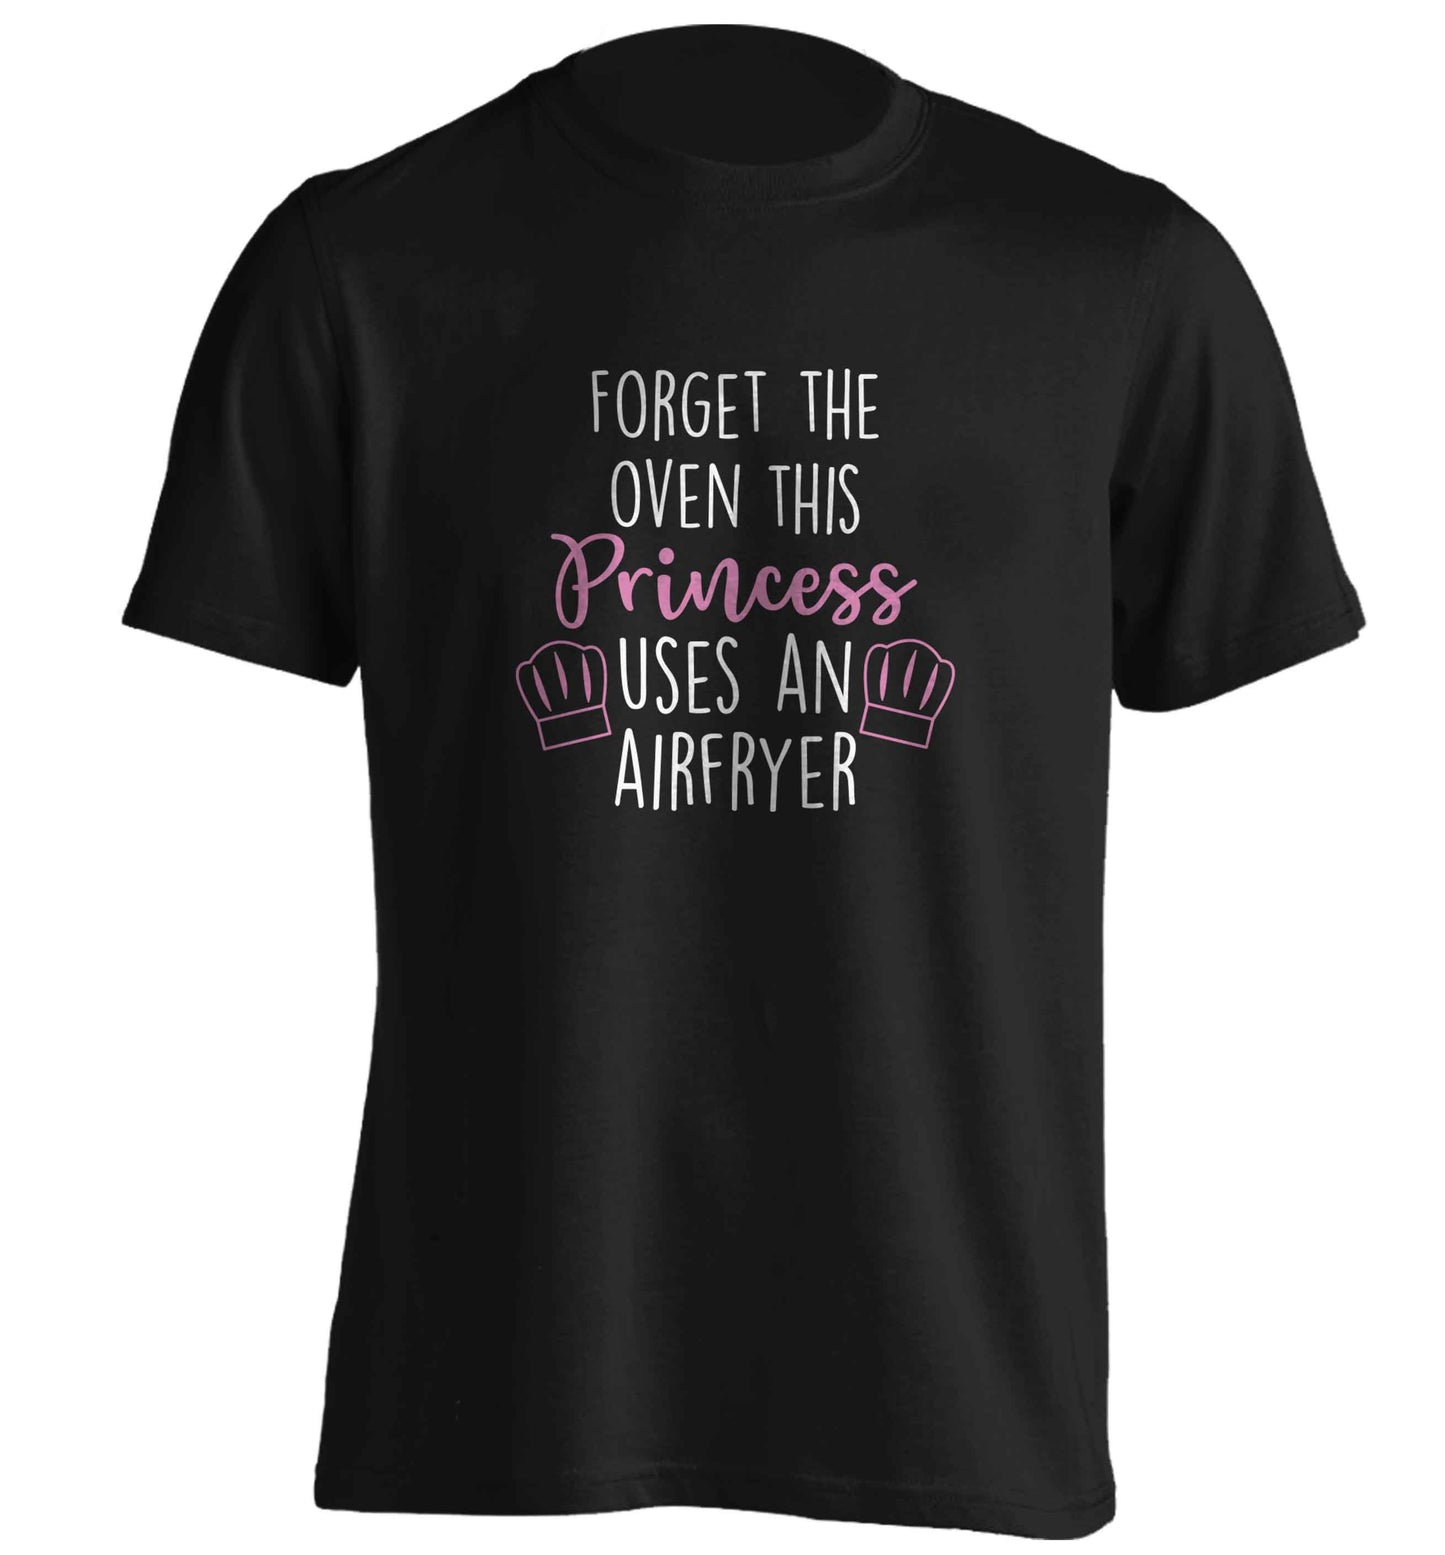 Forget the oven this princess uses an airfryeradults unisex black Tshirt 2XL